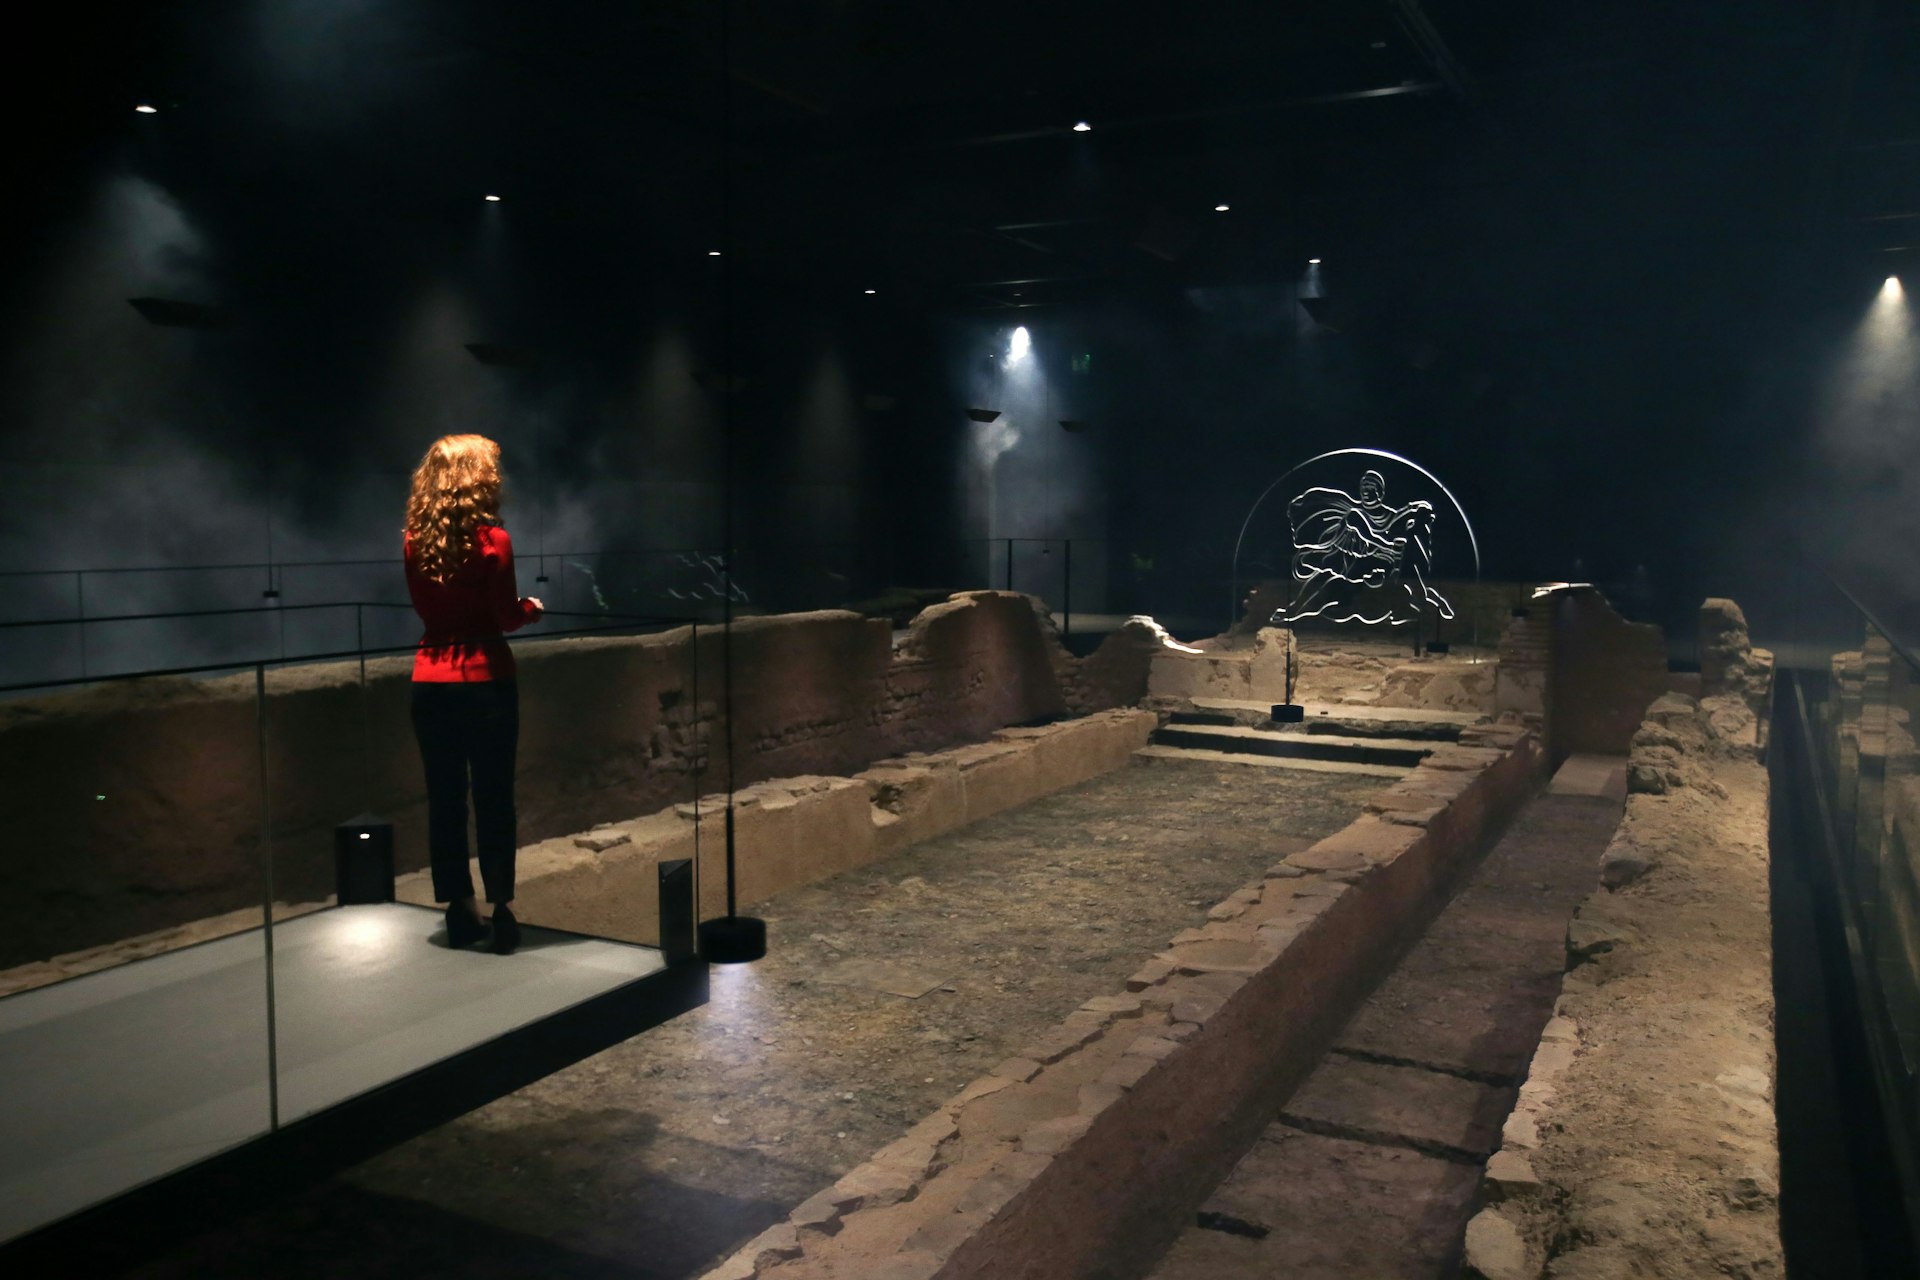 An employee poses alongside a reconstruction of the Roman Temple of Mithras. It is dark but the stone is illuminated by warm light.